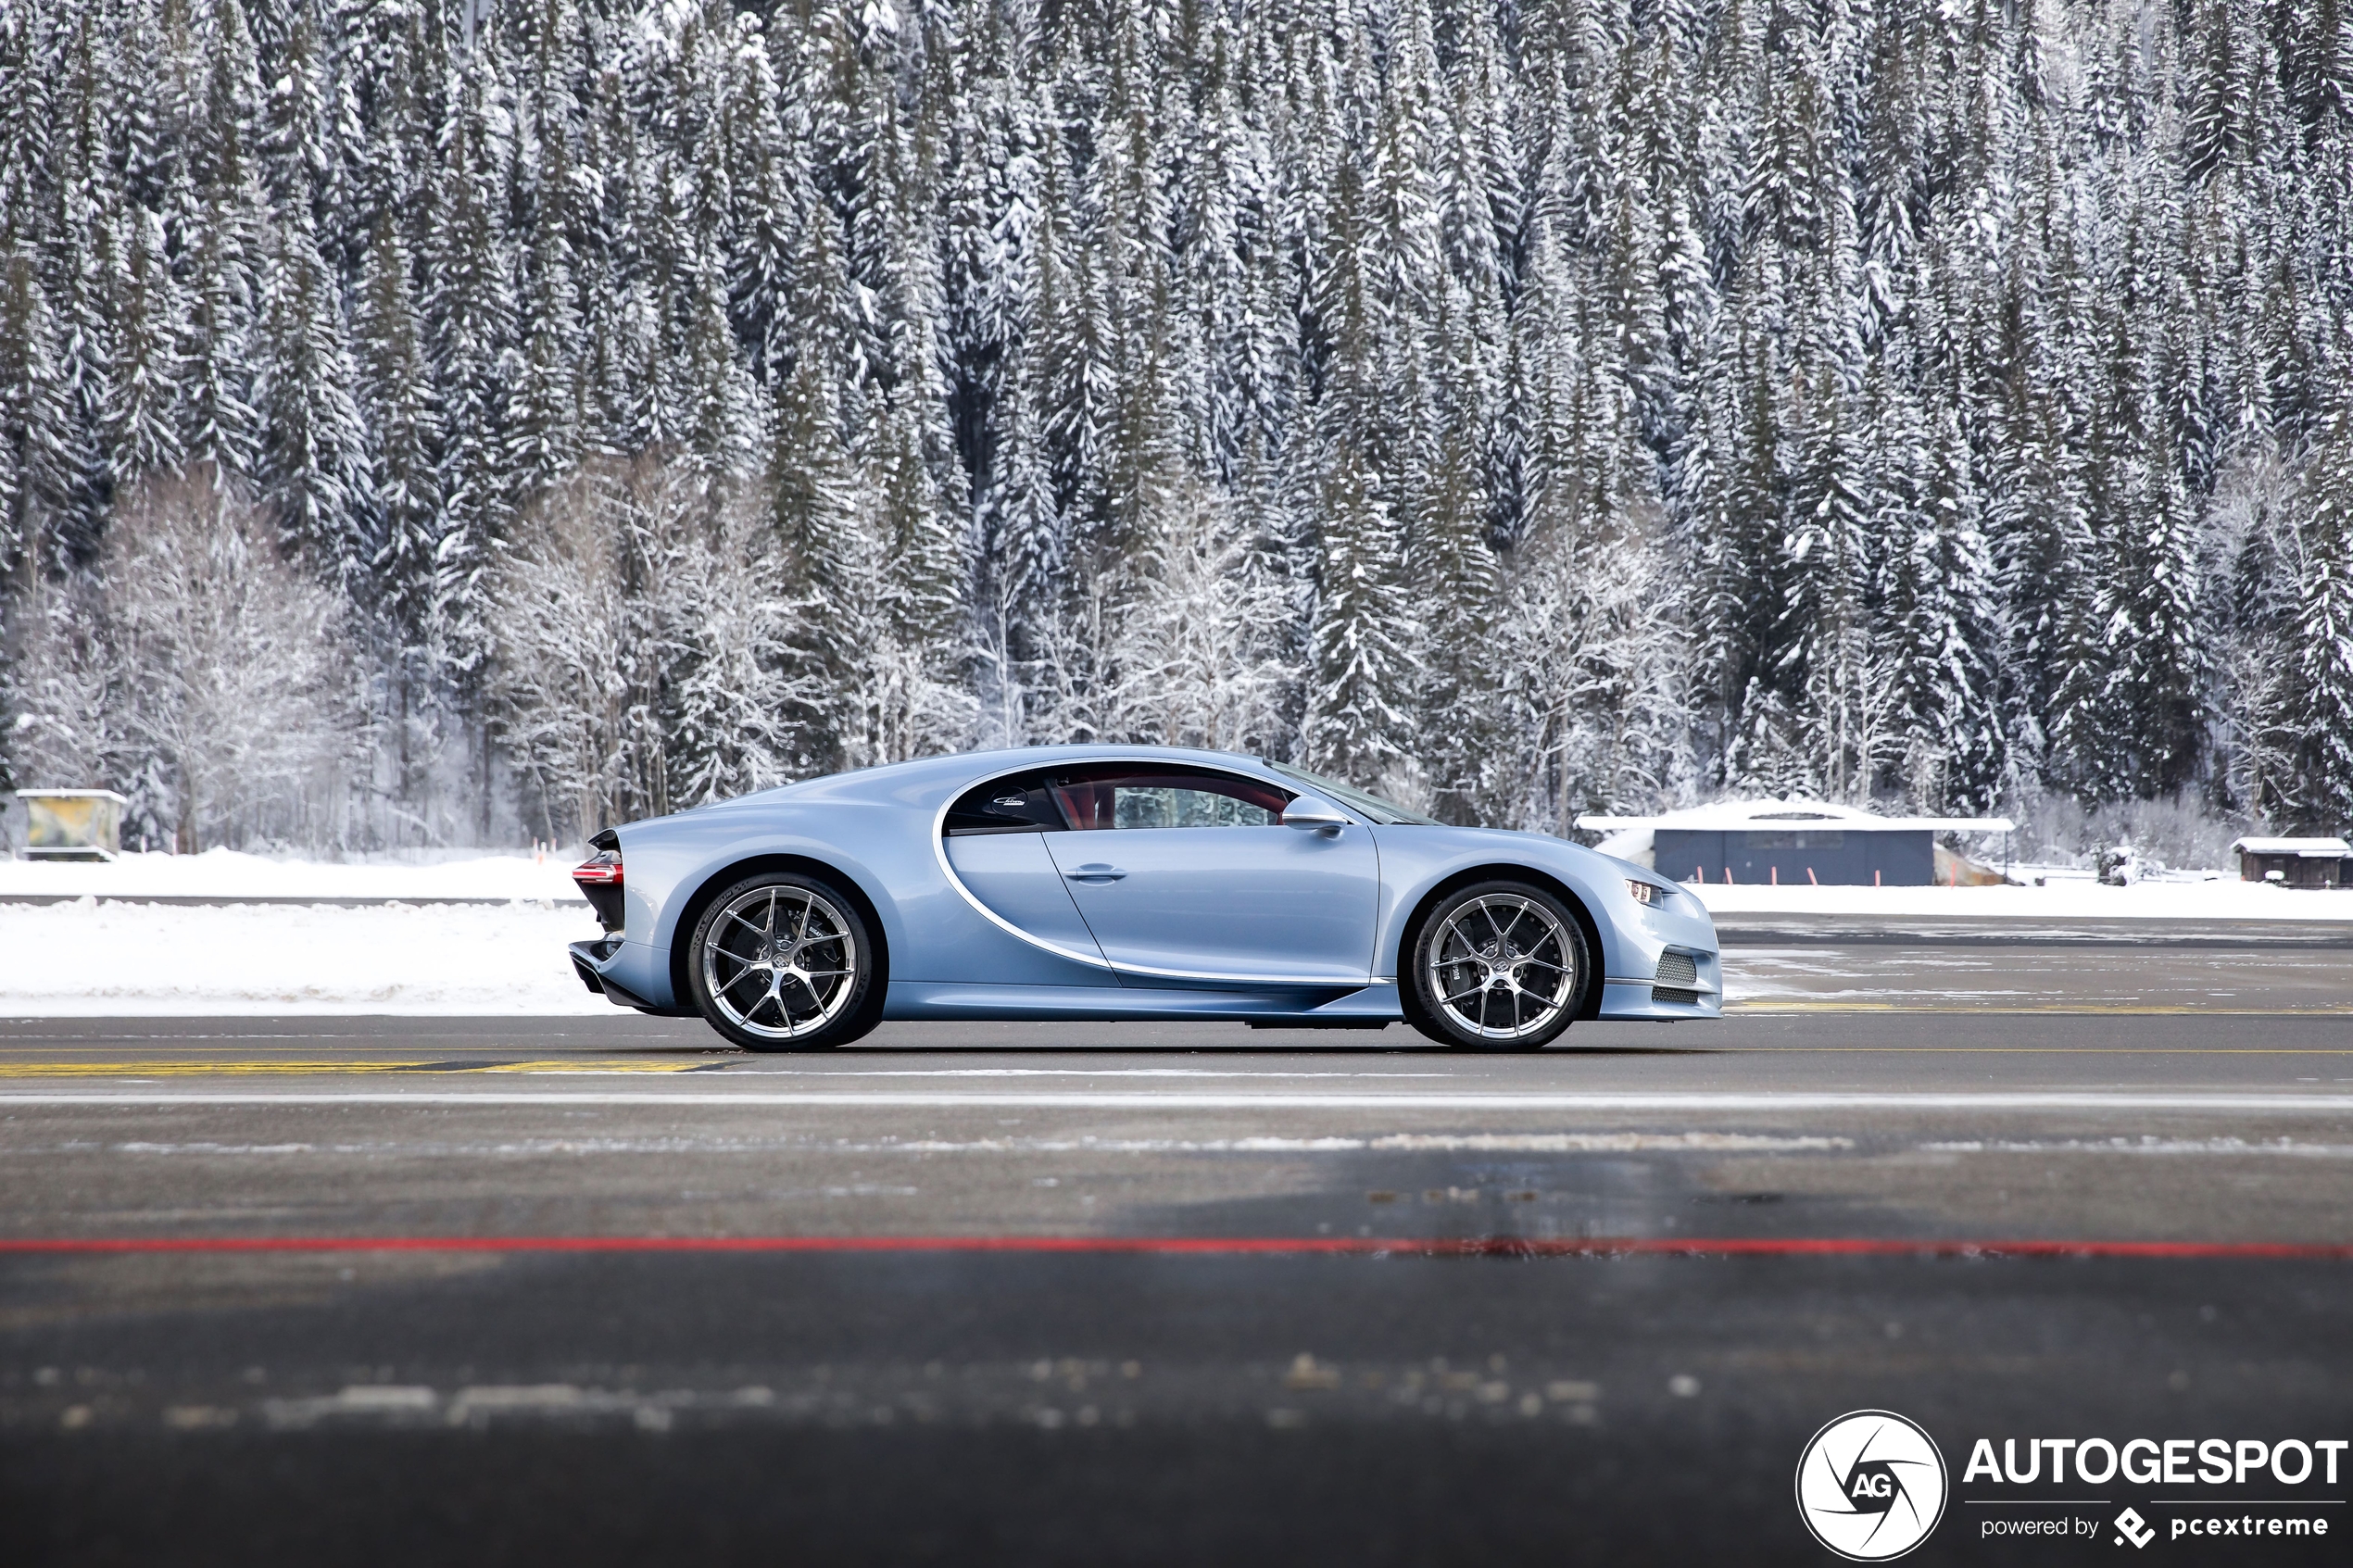 Incredible Bugatti combination from Gstaad